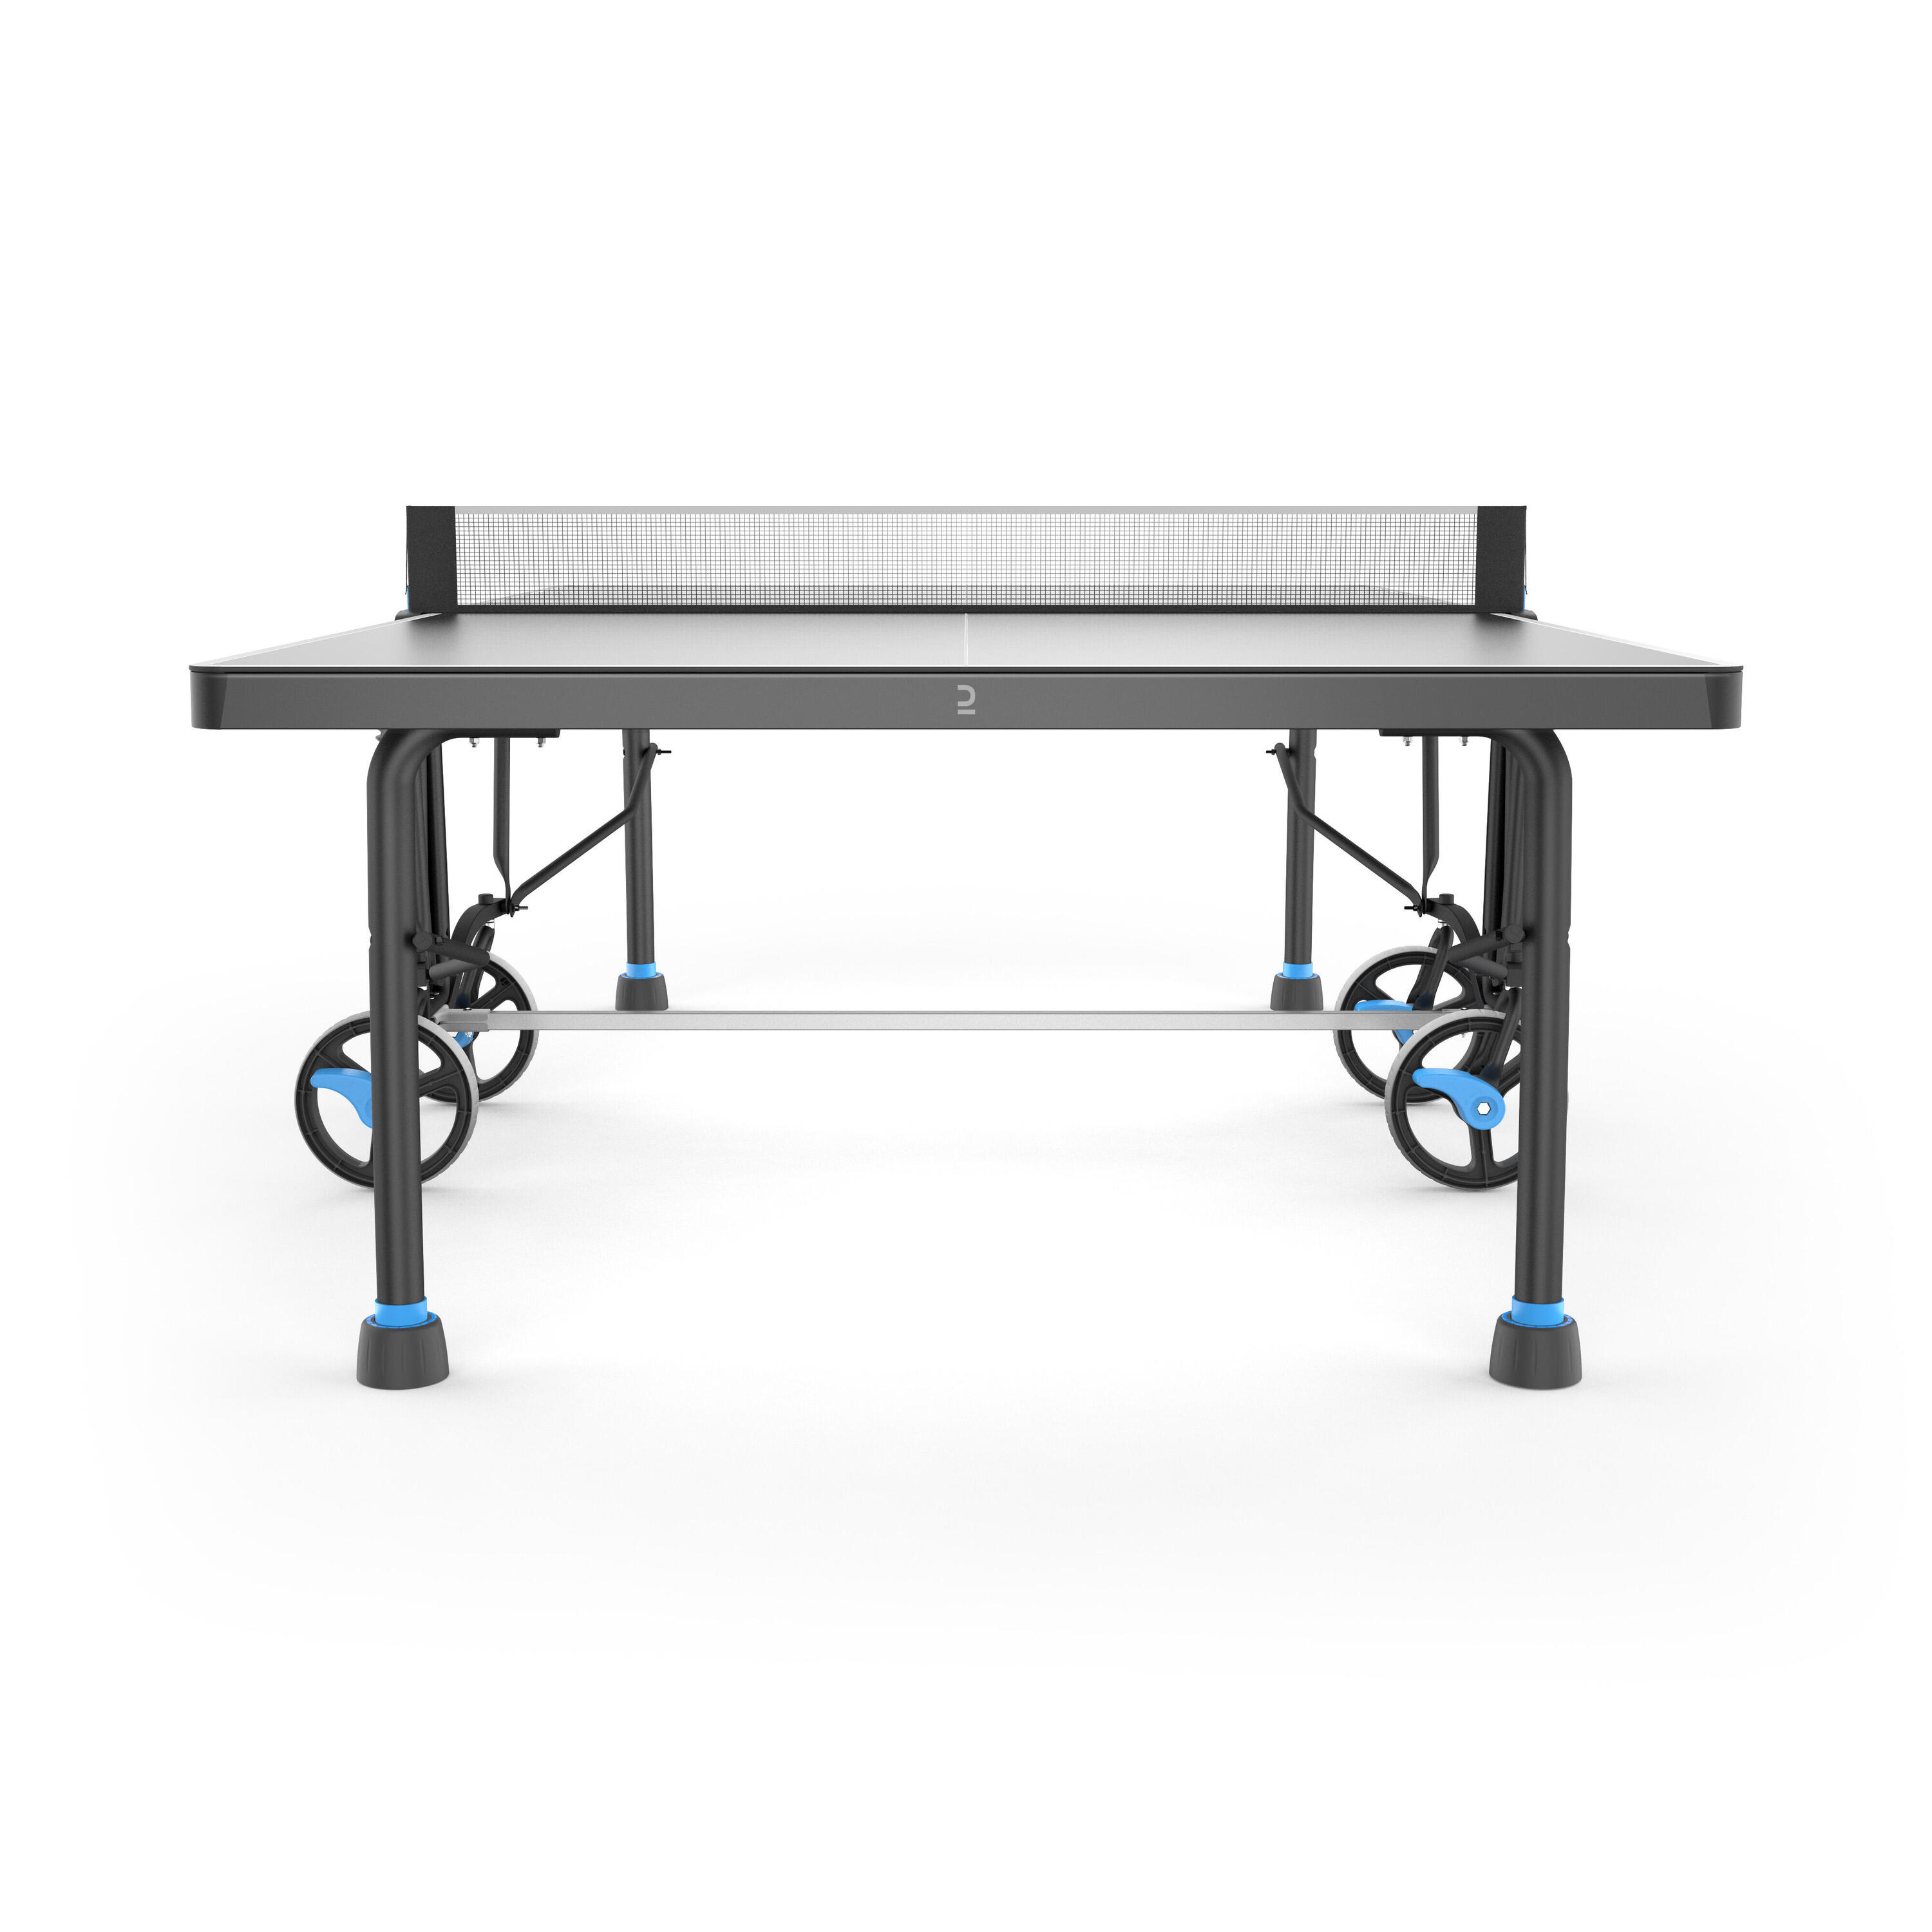 Outdoor Table Tennis Table PPT 930.2 With Cover - Black 14/16